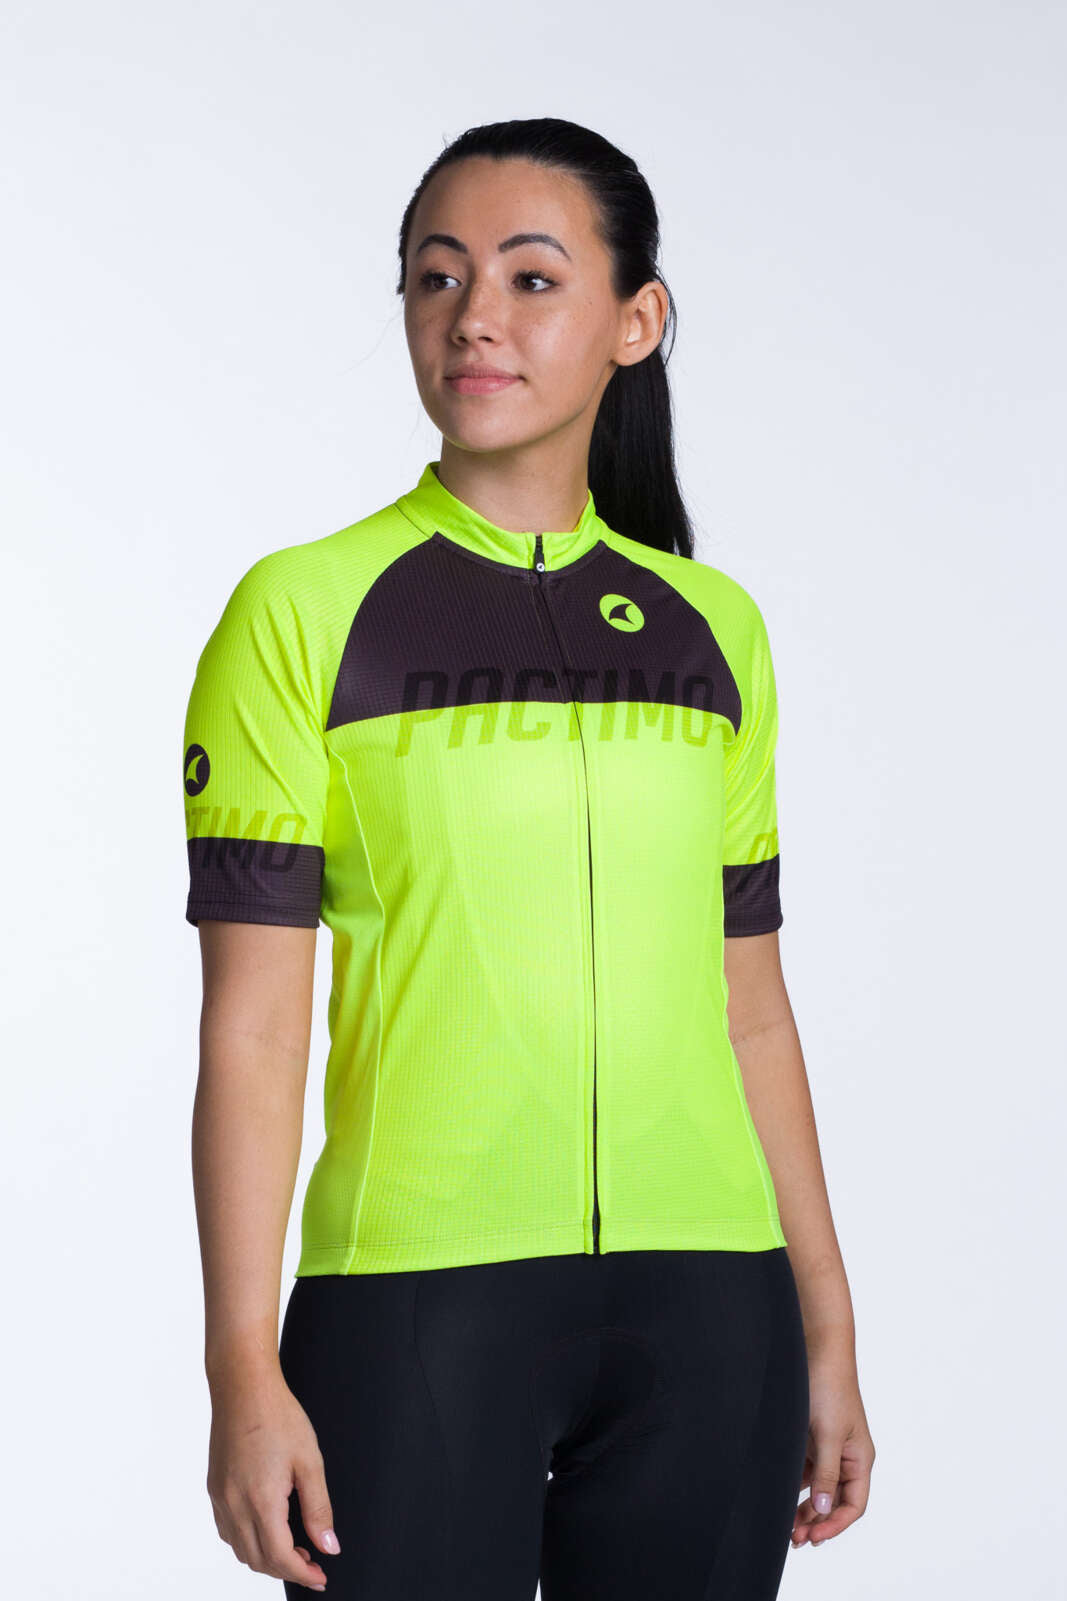 Women's High-Viz Yellow Loose Fit Cycling Jersey - Front View